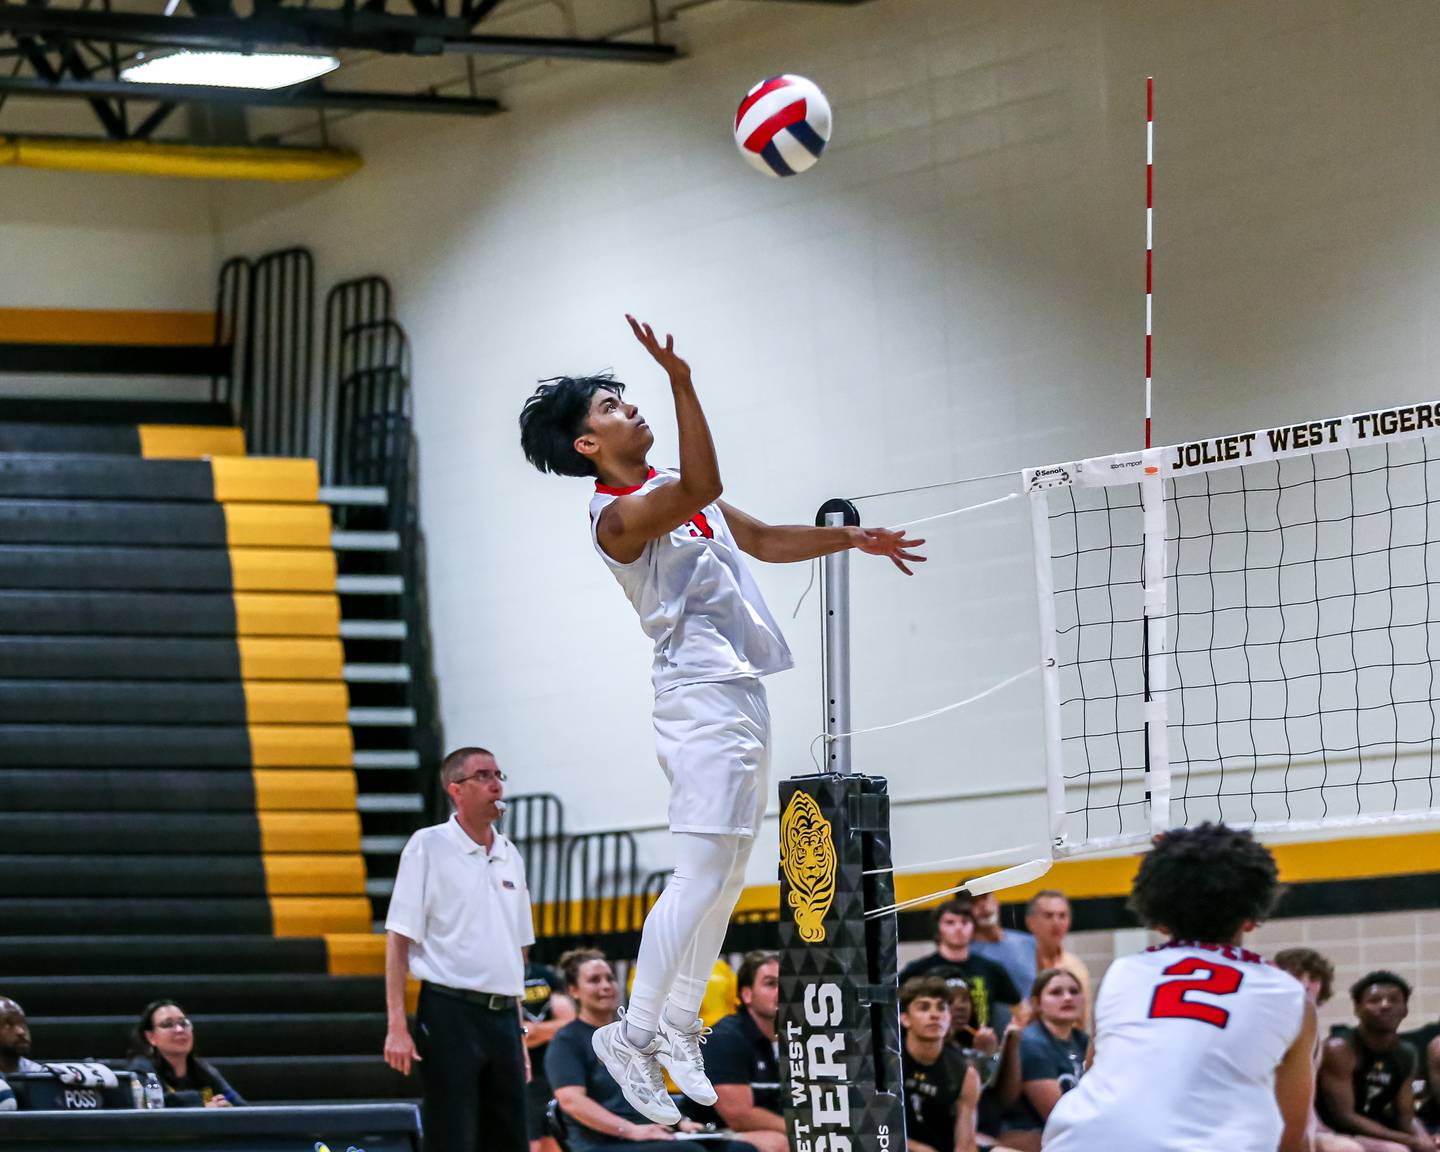 Bolingbrook's Tristan Caminar (5) tips the ball over the net during Joliet West Regional Championship match between Bolingbrook at Joliet West.  May 23, 2024.